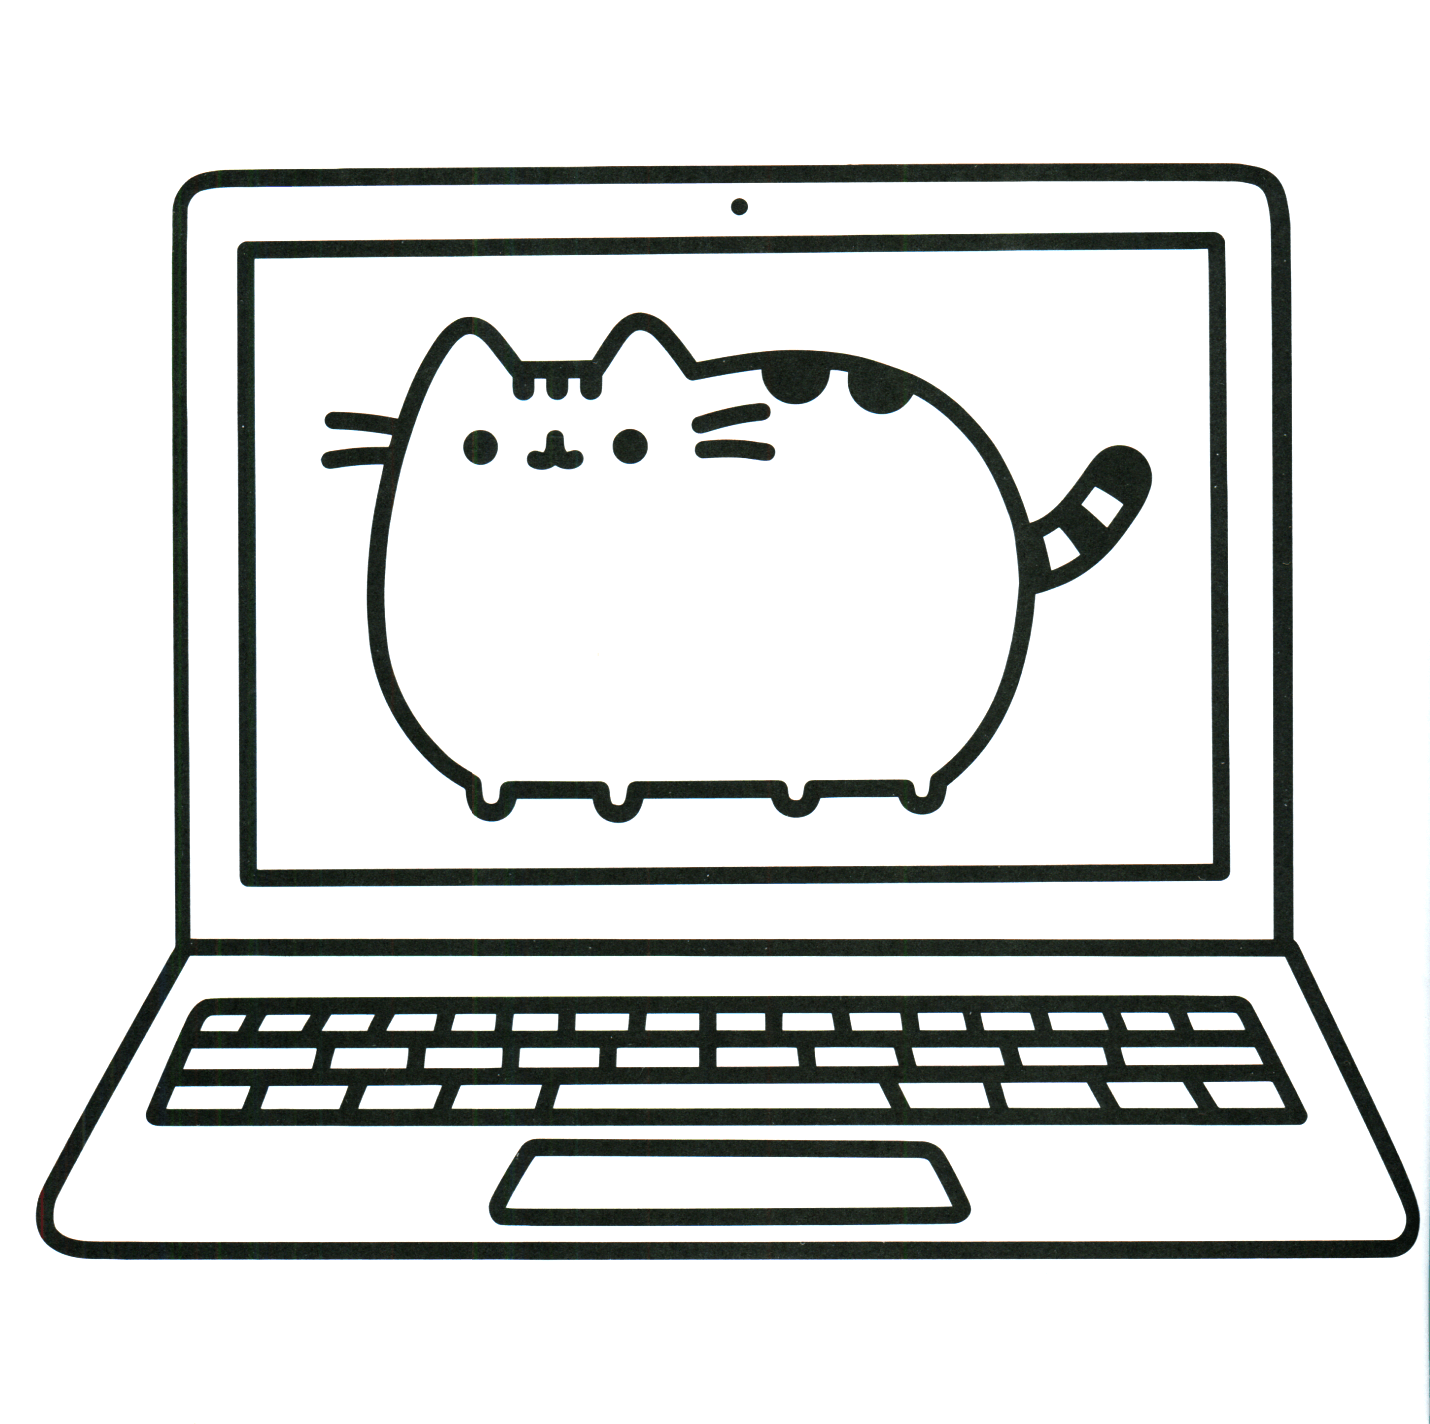 Laptop Pusheen Coloring Pages